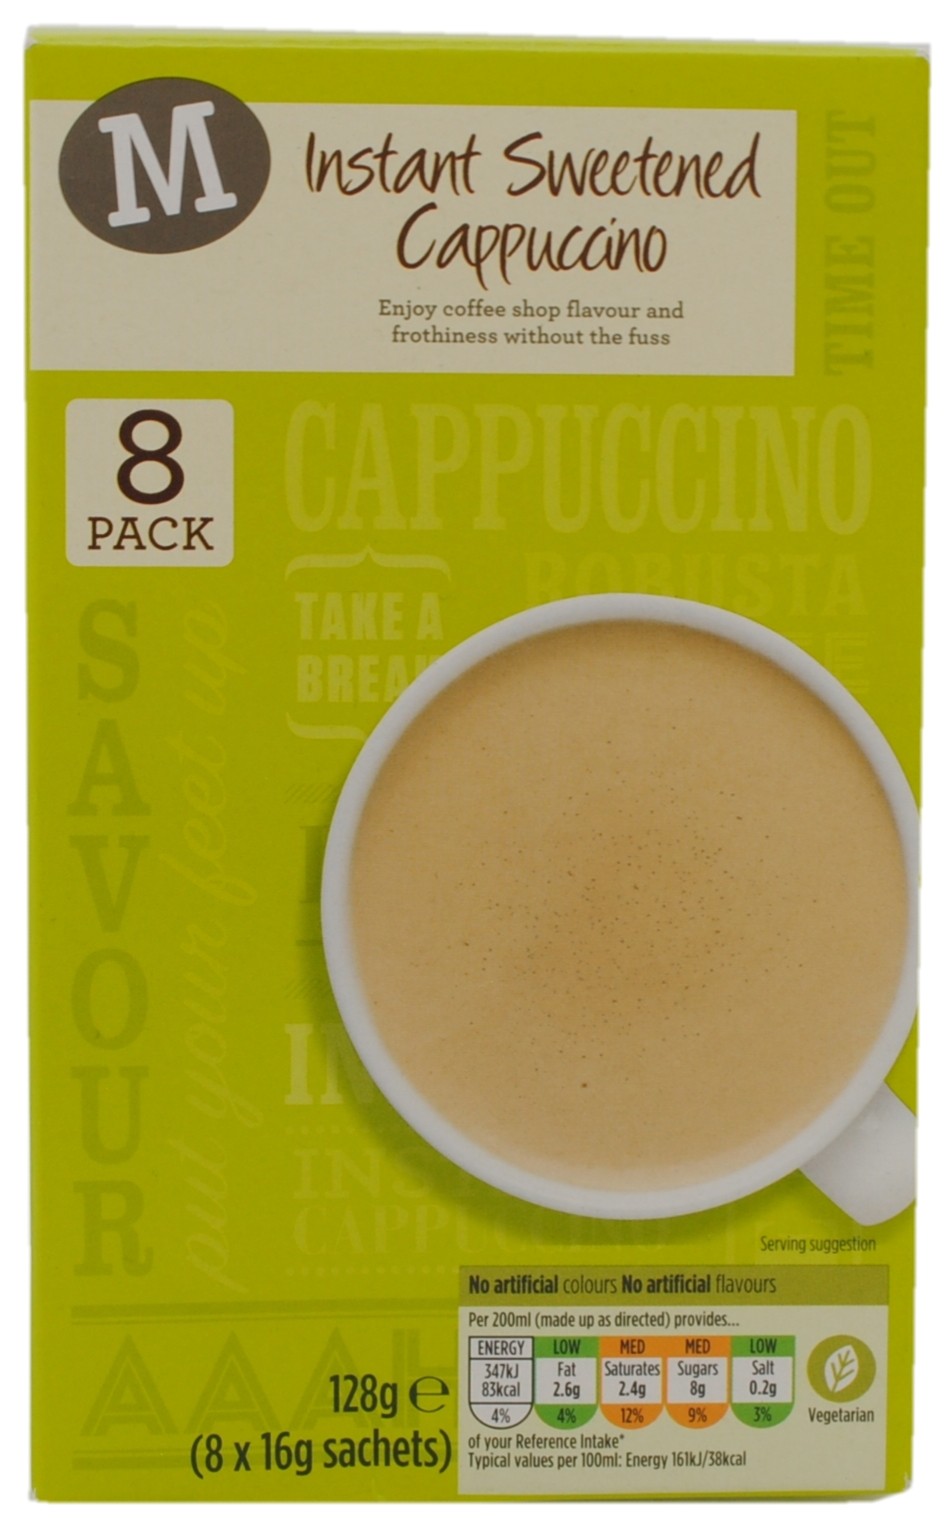 Instant Sweetened Cappuccino